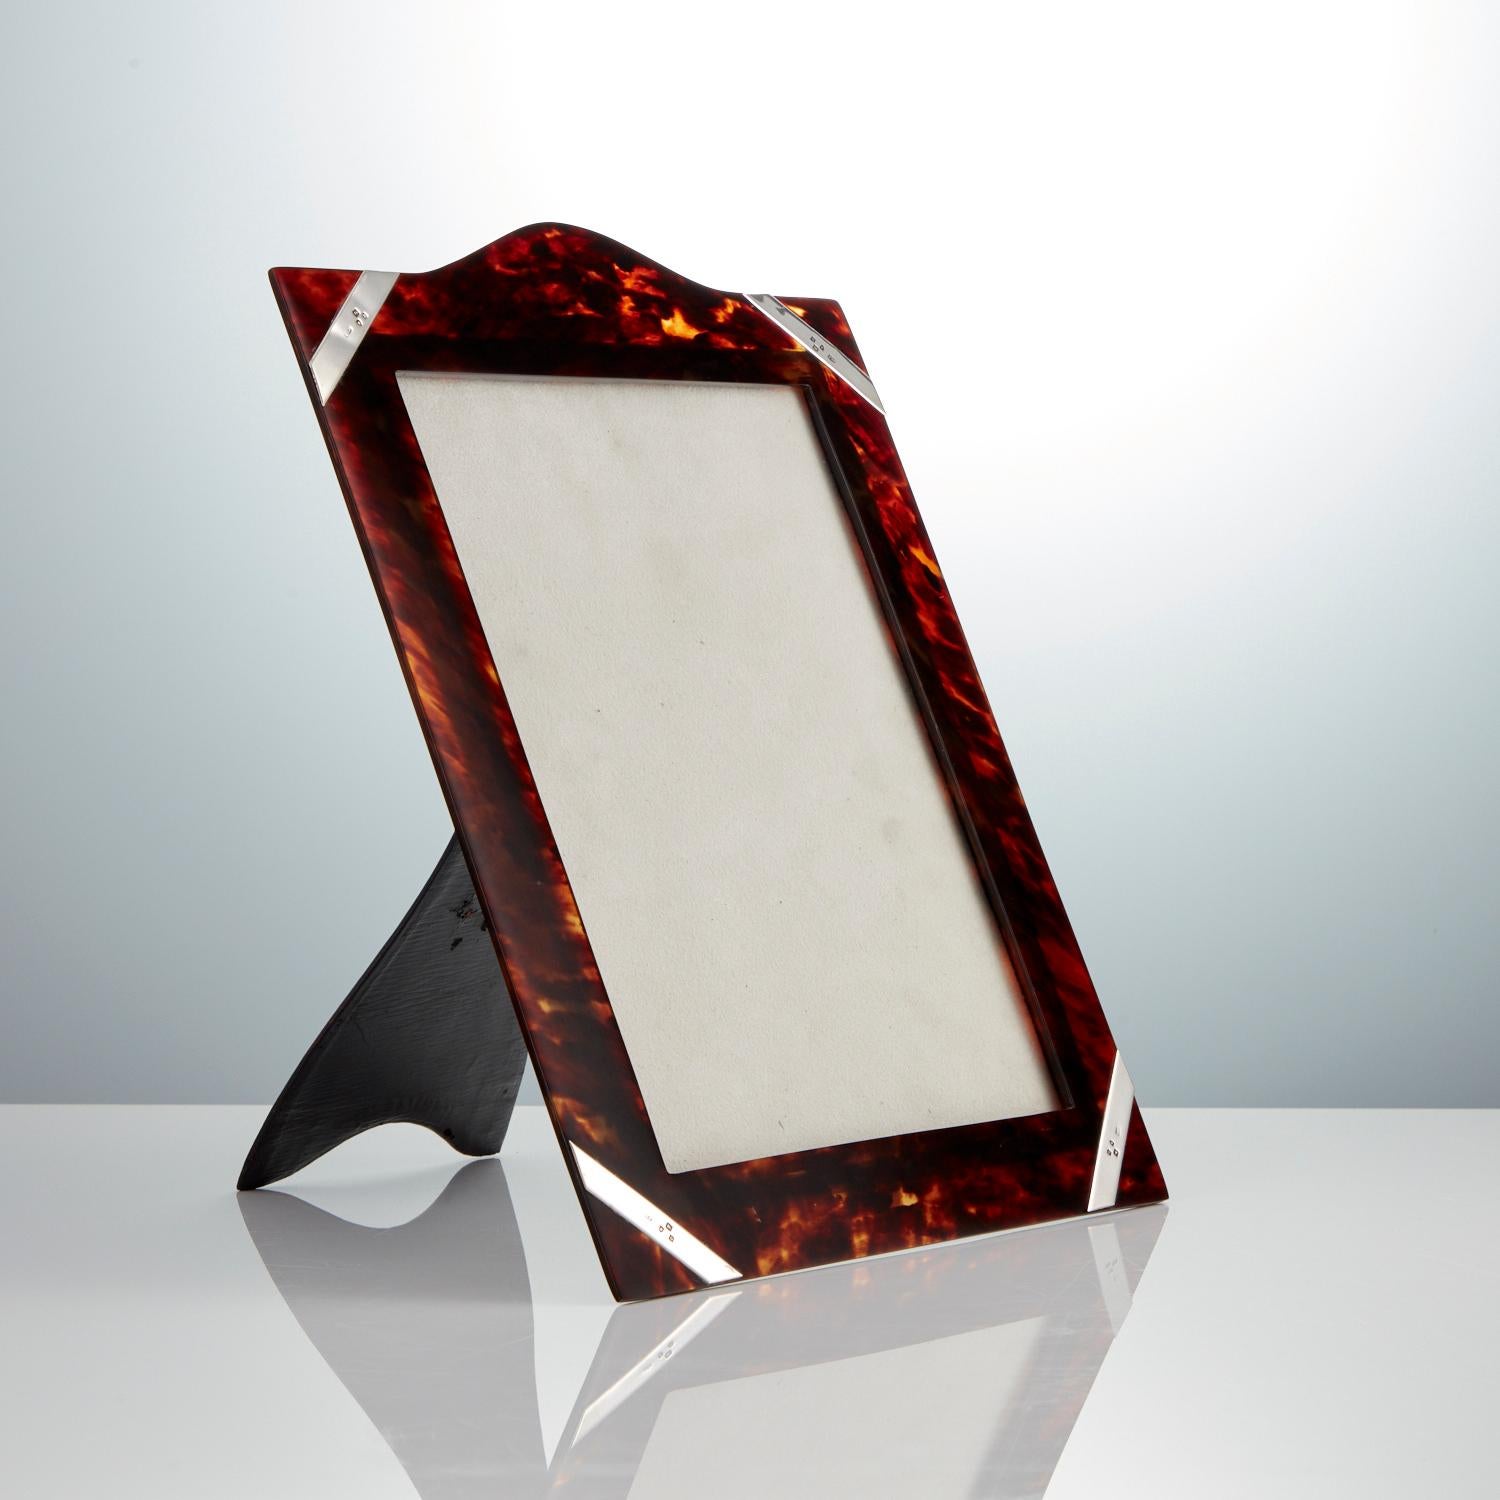 19th Century Large Antique Tortoiseshell Photo Frame with Silver Overlay Corners London 1897